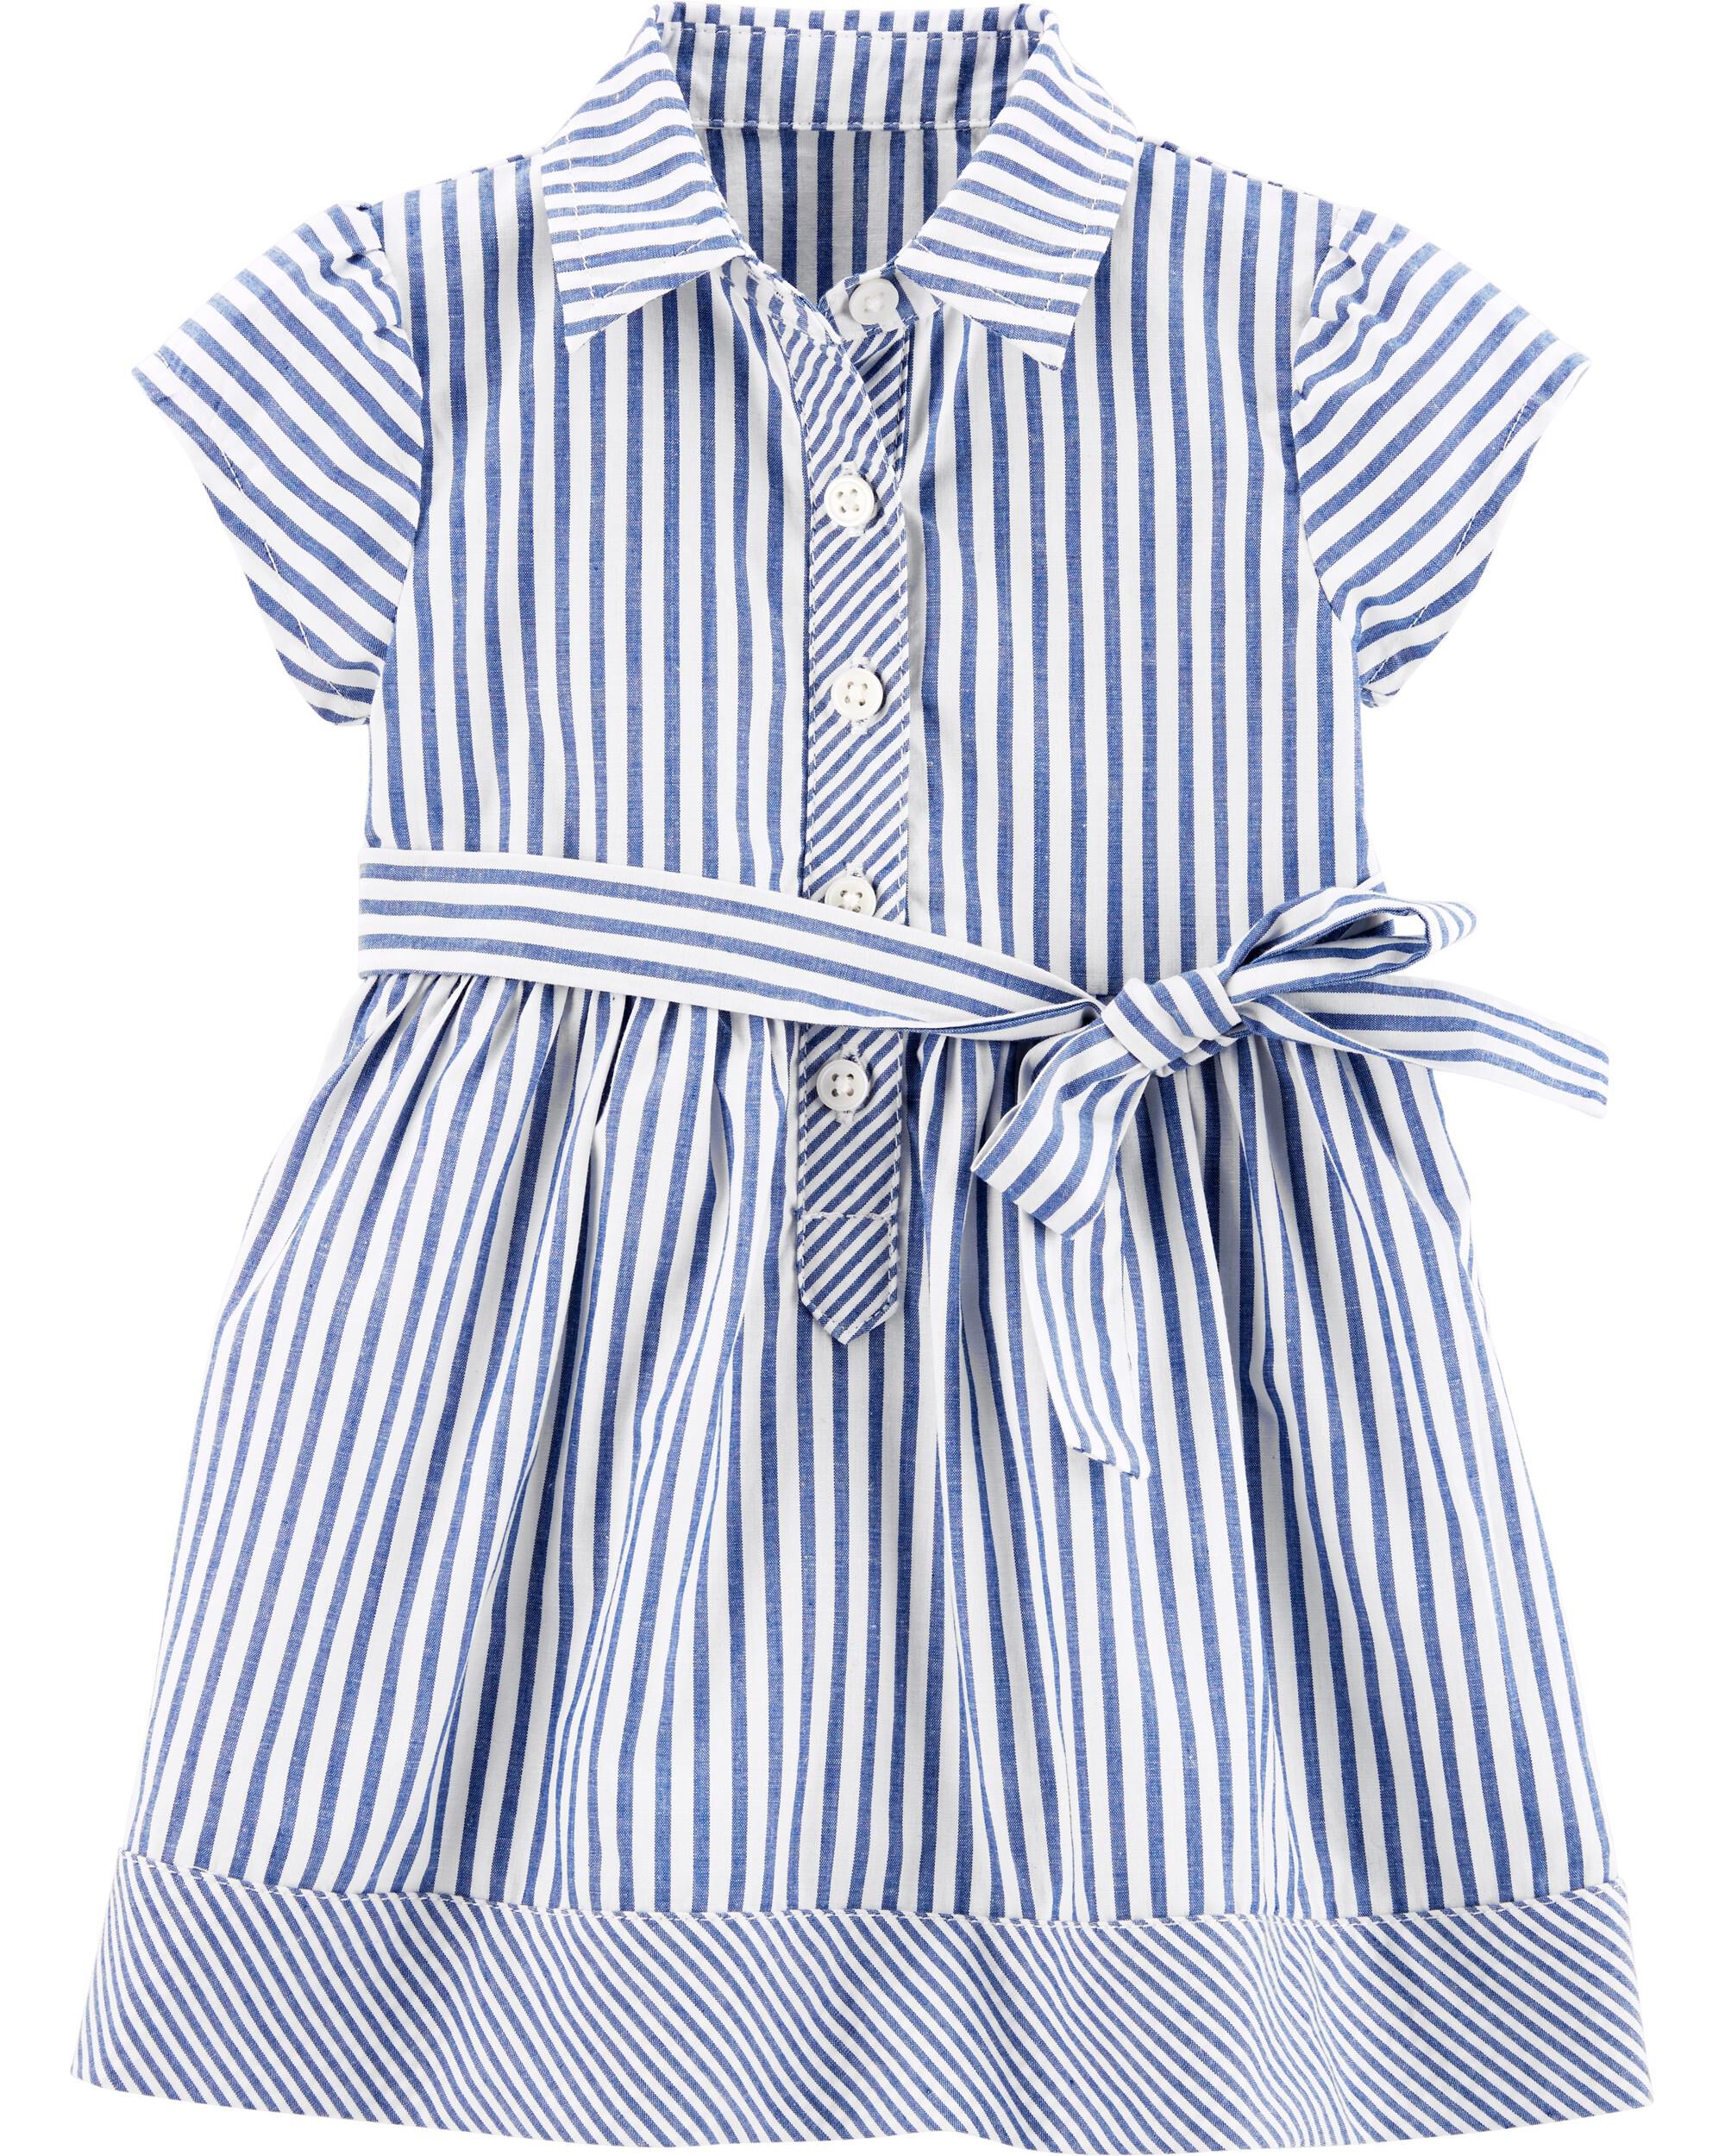 carter's blue and white striped dress